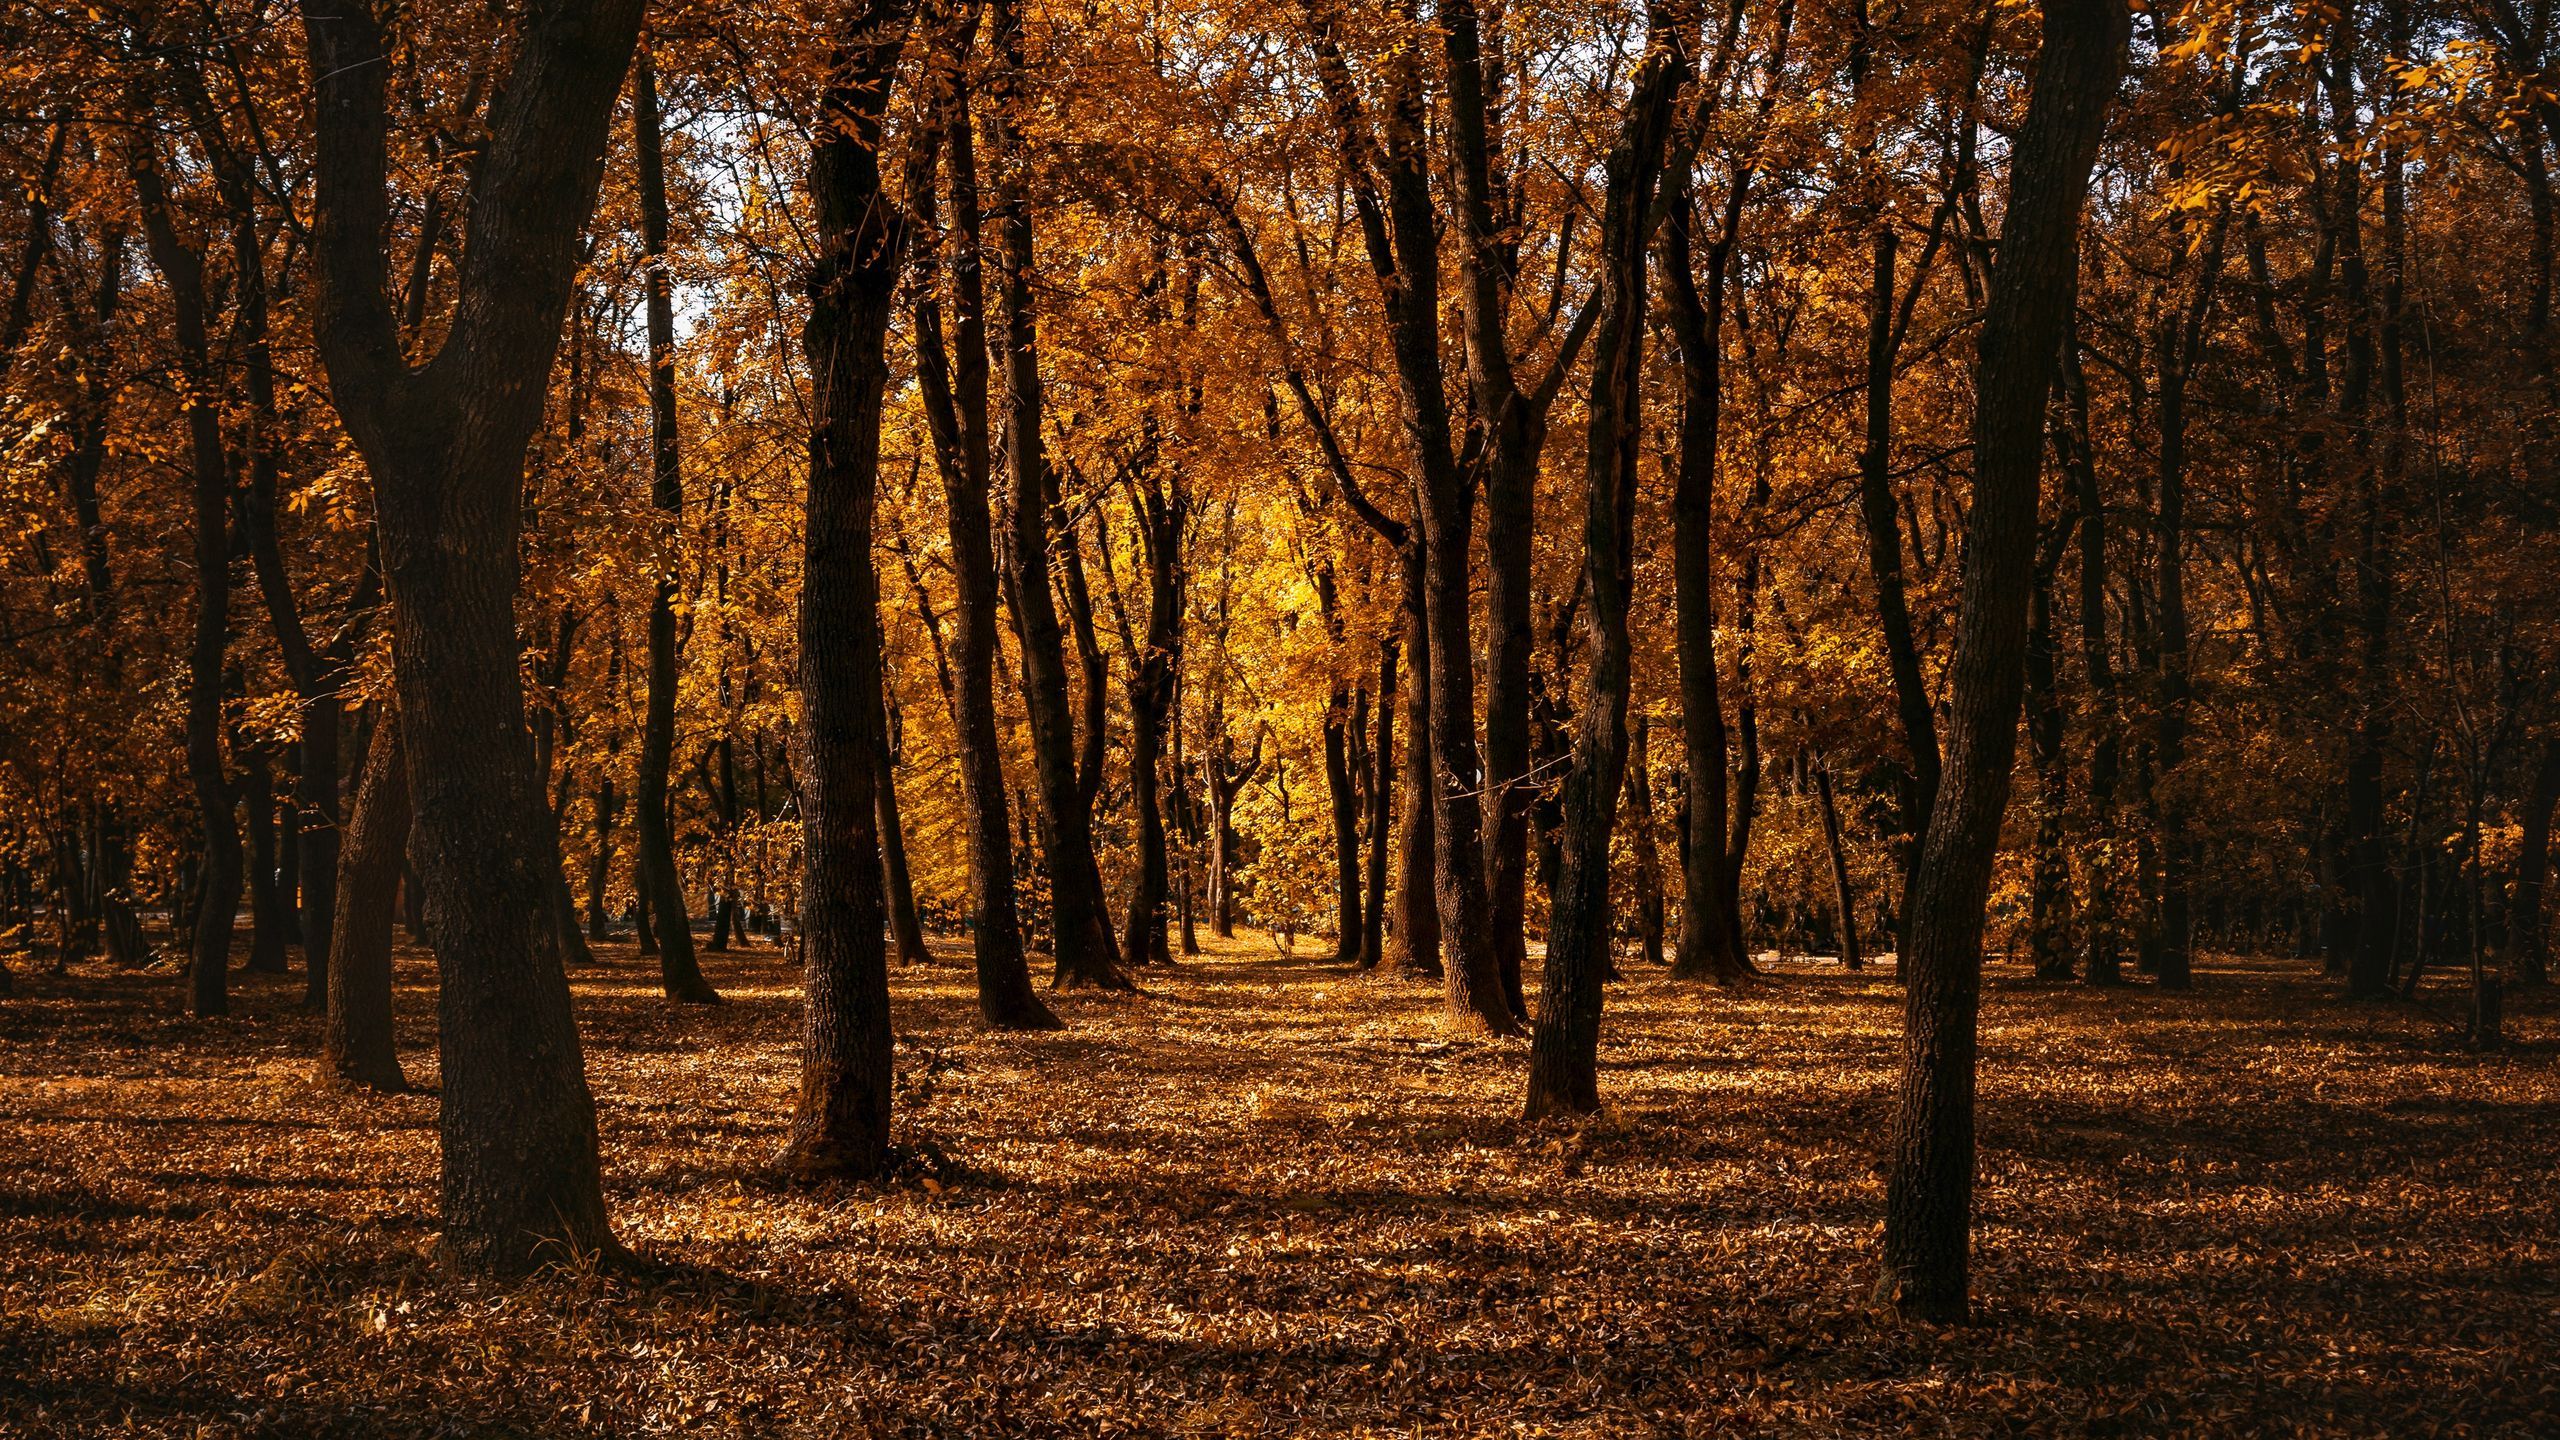 Download wallpaper 2560x1440 autumn, forest, trees, park, path widescreen 16:9 HD background